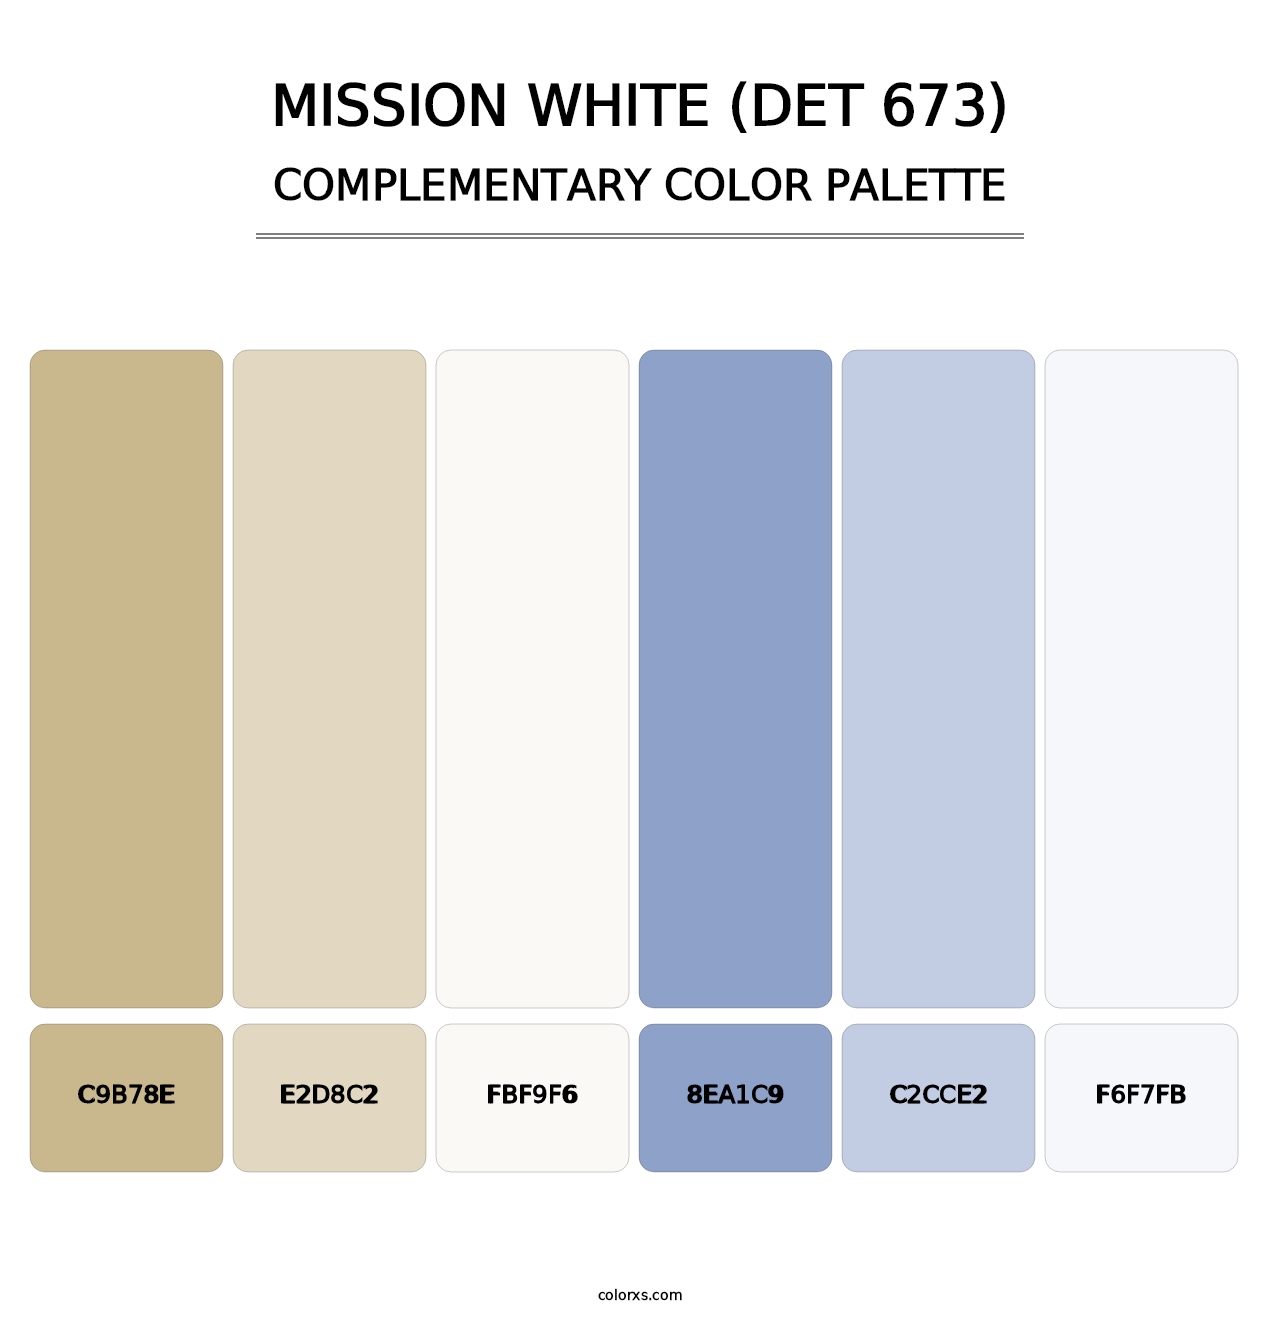 Mission White (DET 673) - Complementary Color Palette